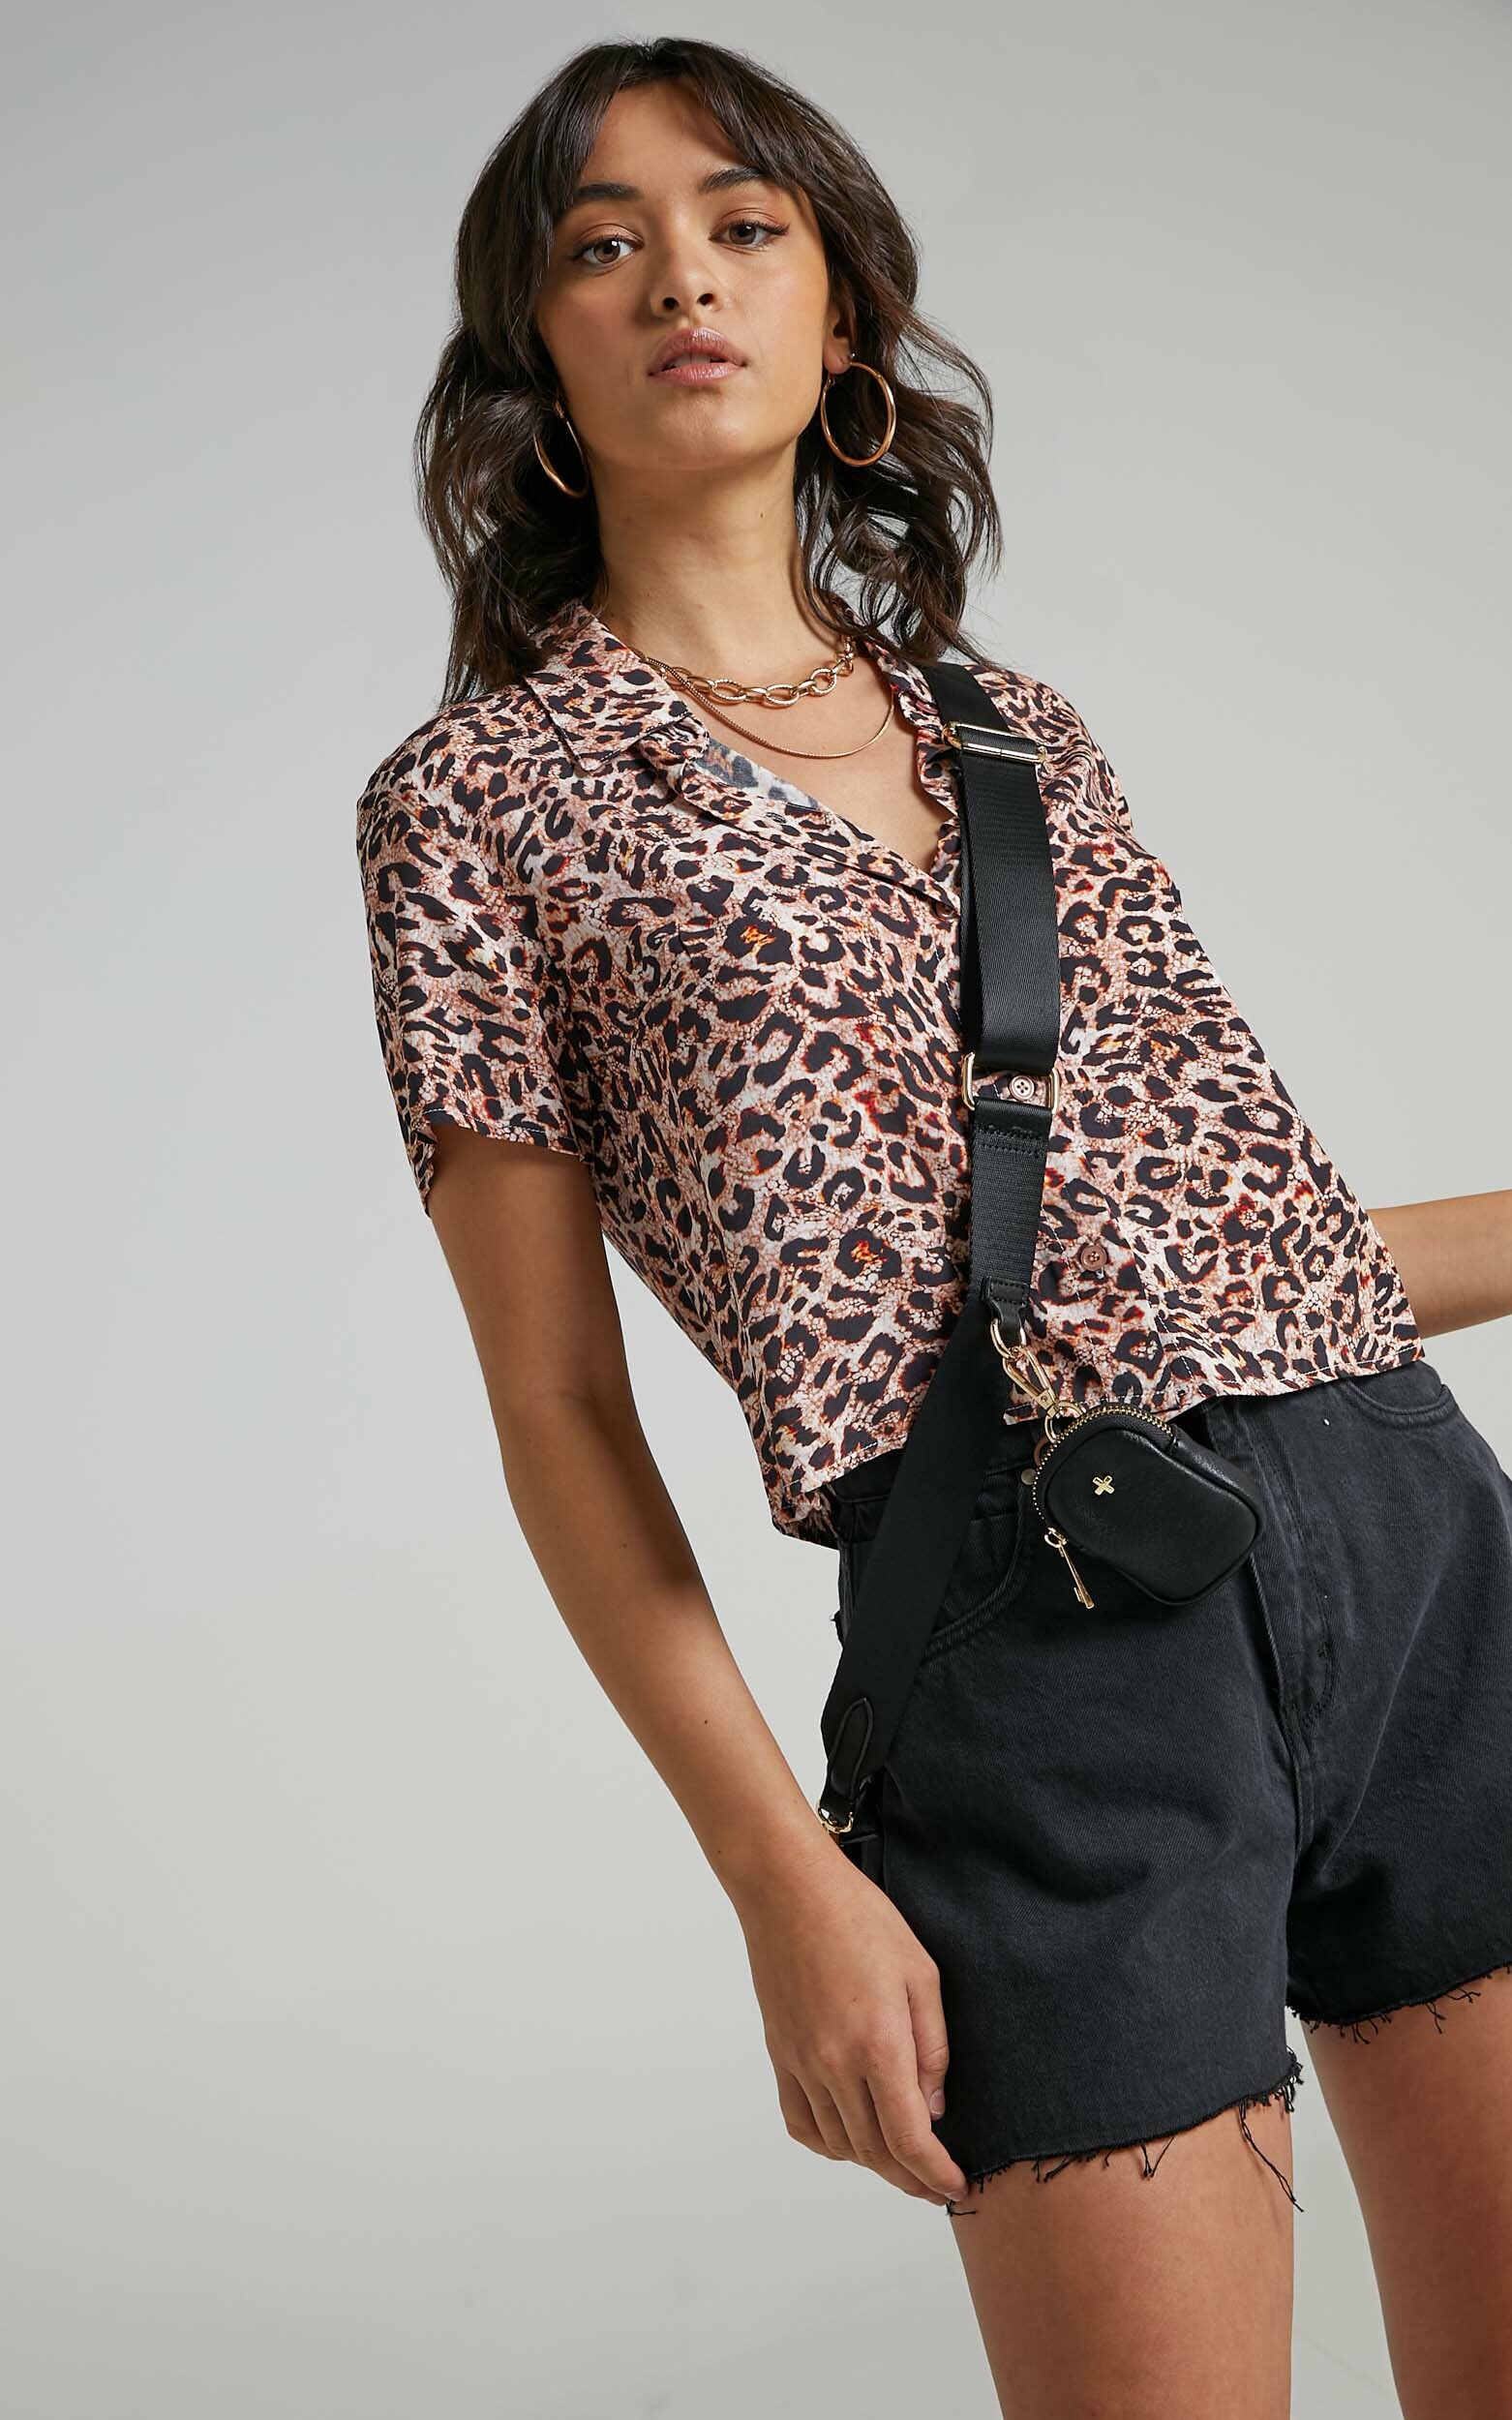 Astra Stars Shirt in Leopard - 06, BRN1, hi-res image number null